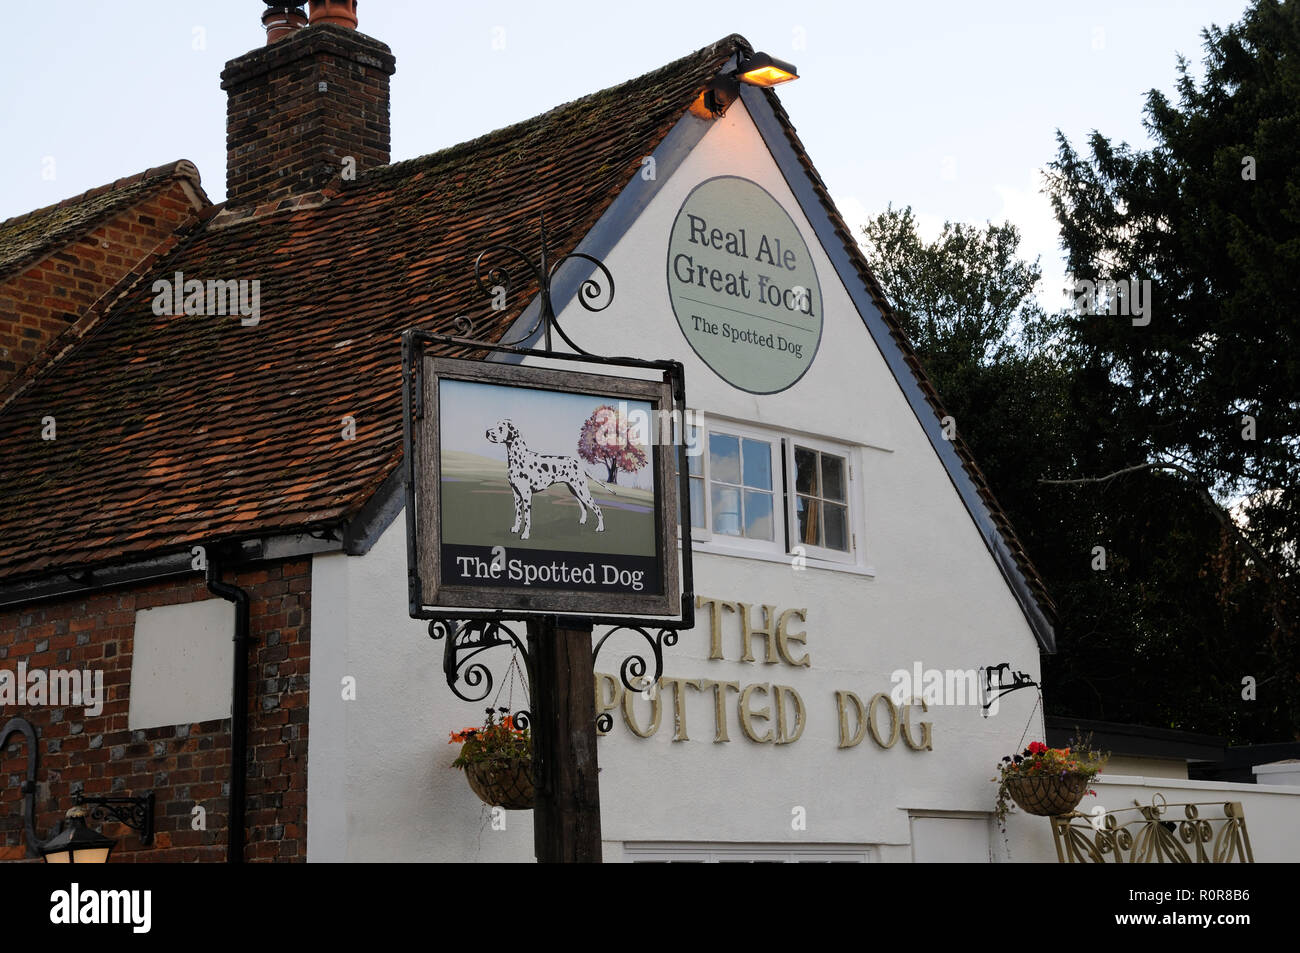 The Spotted Dog, Flamstead, Hertfordshire. Stock Photo